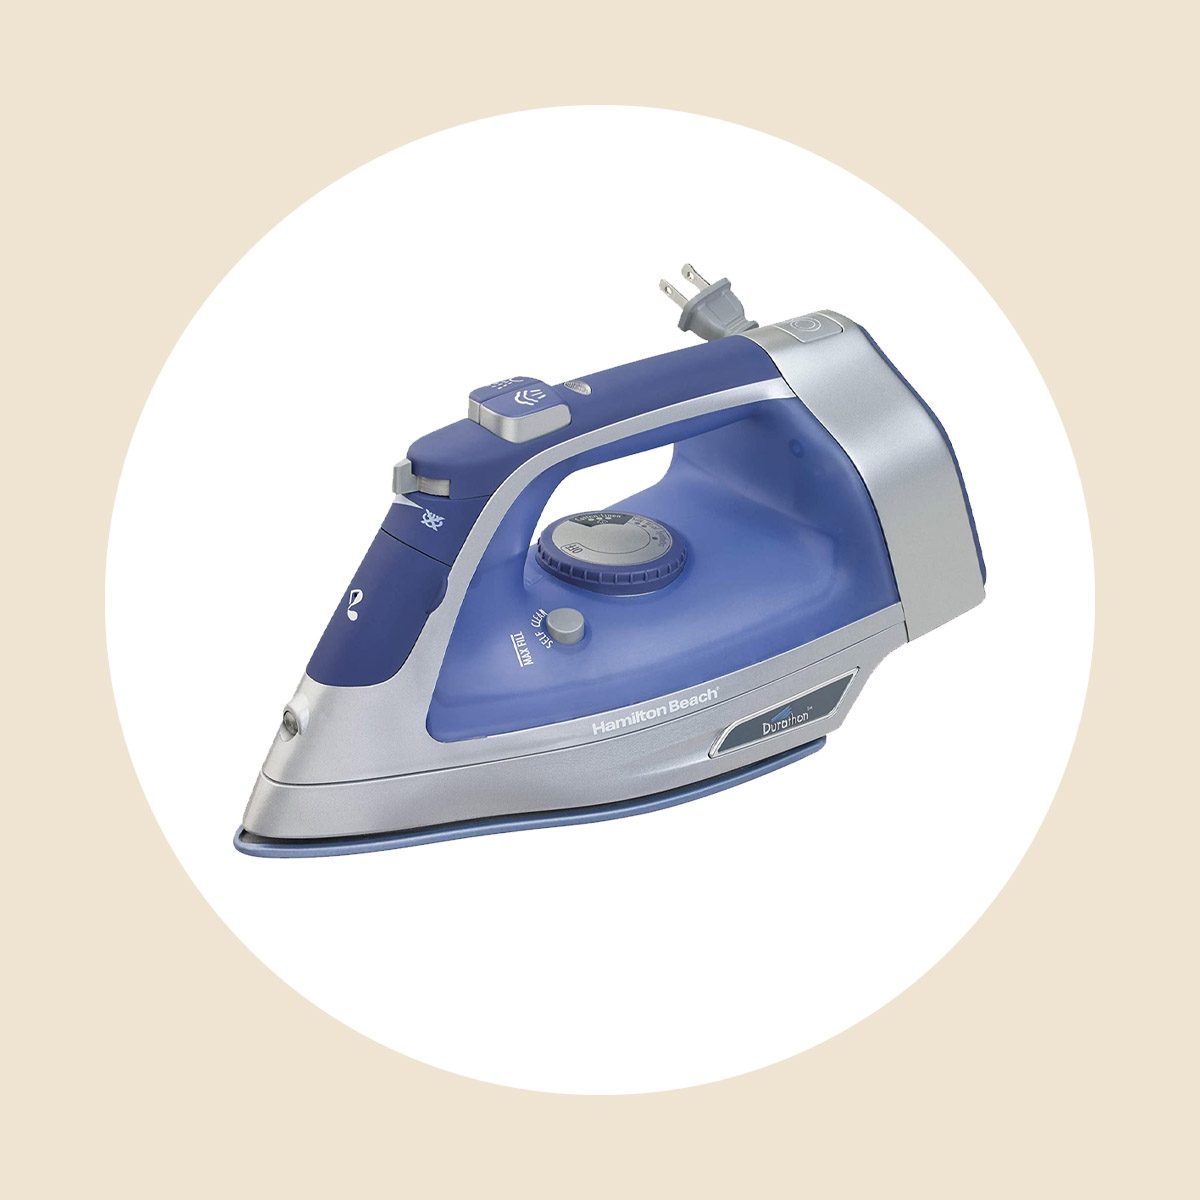 Travel iron recall for Steamfast and Brookstone irons sewing discussion  topic @ PatternReview.com